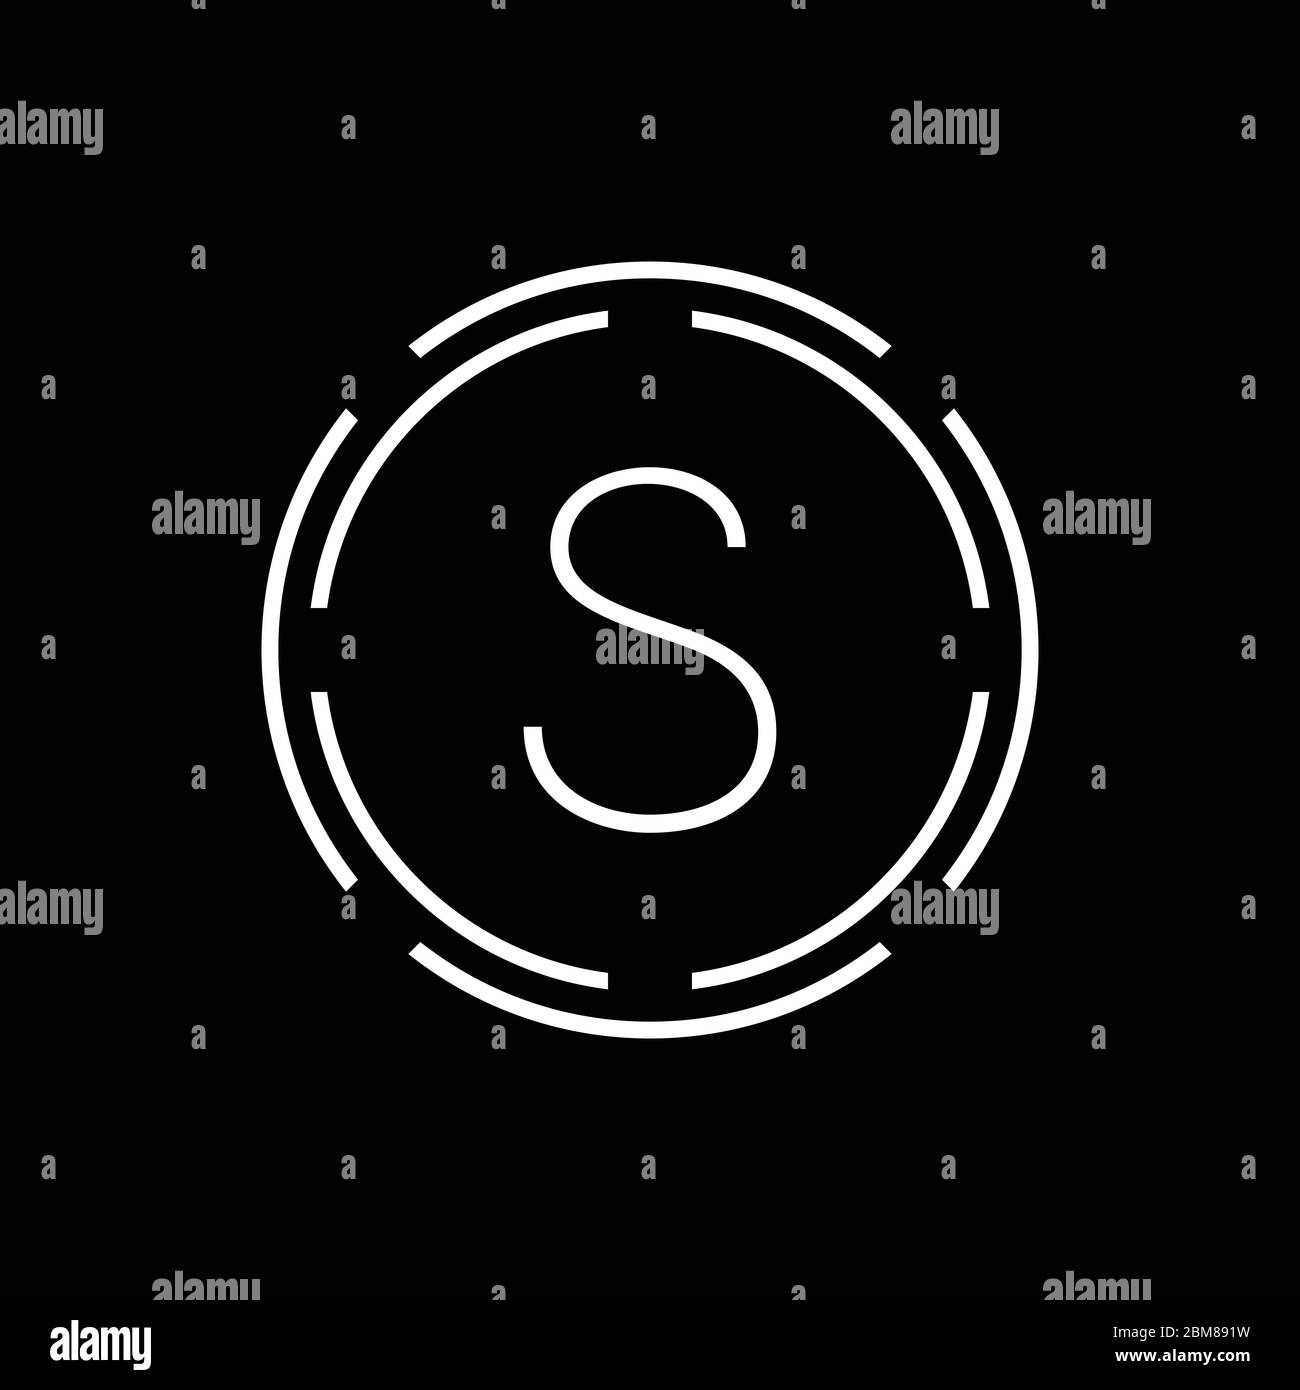 Initial Letter S Logo With Luxury Business Typography Vector Template. Creative Abstract Letter S Logo Design Stock Vector